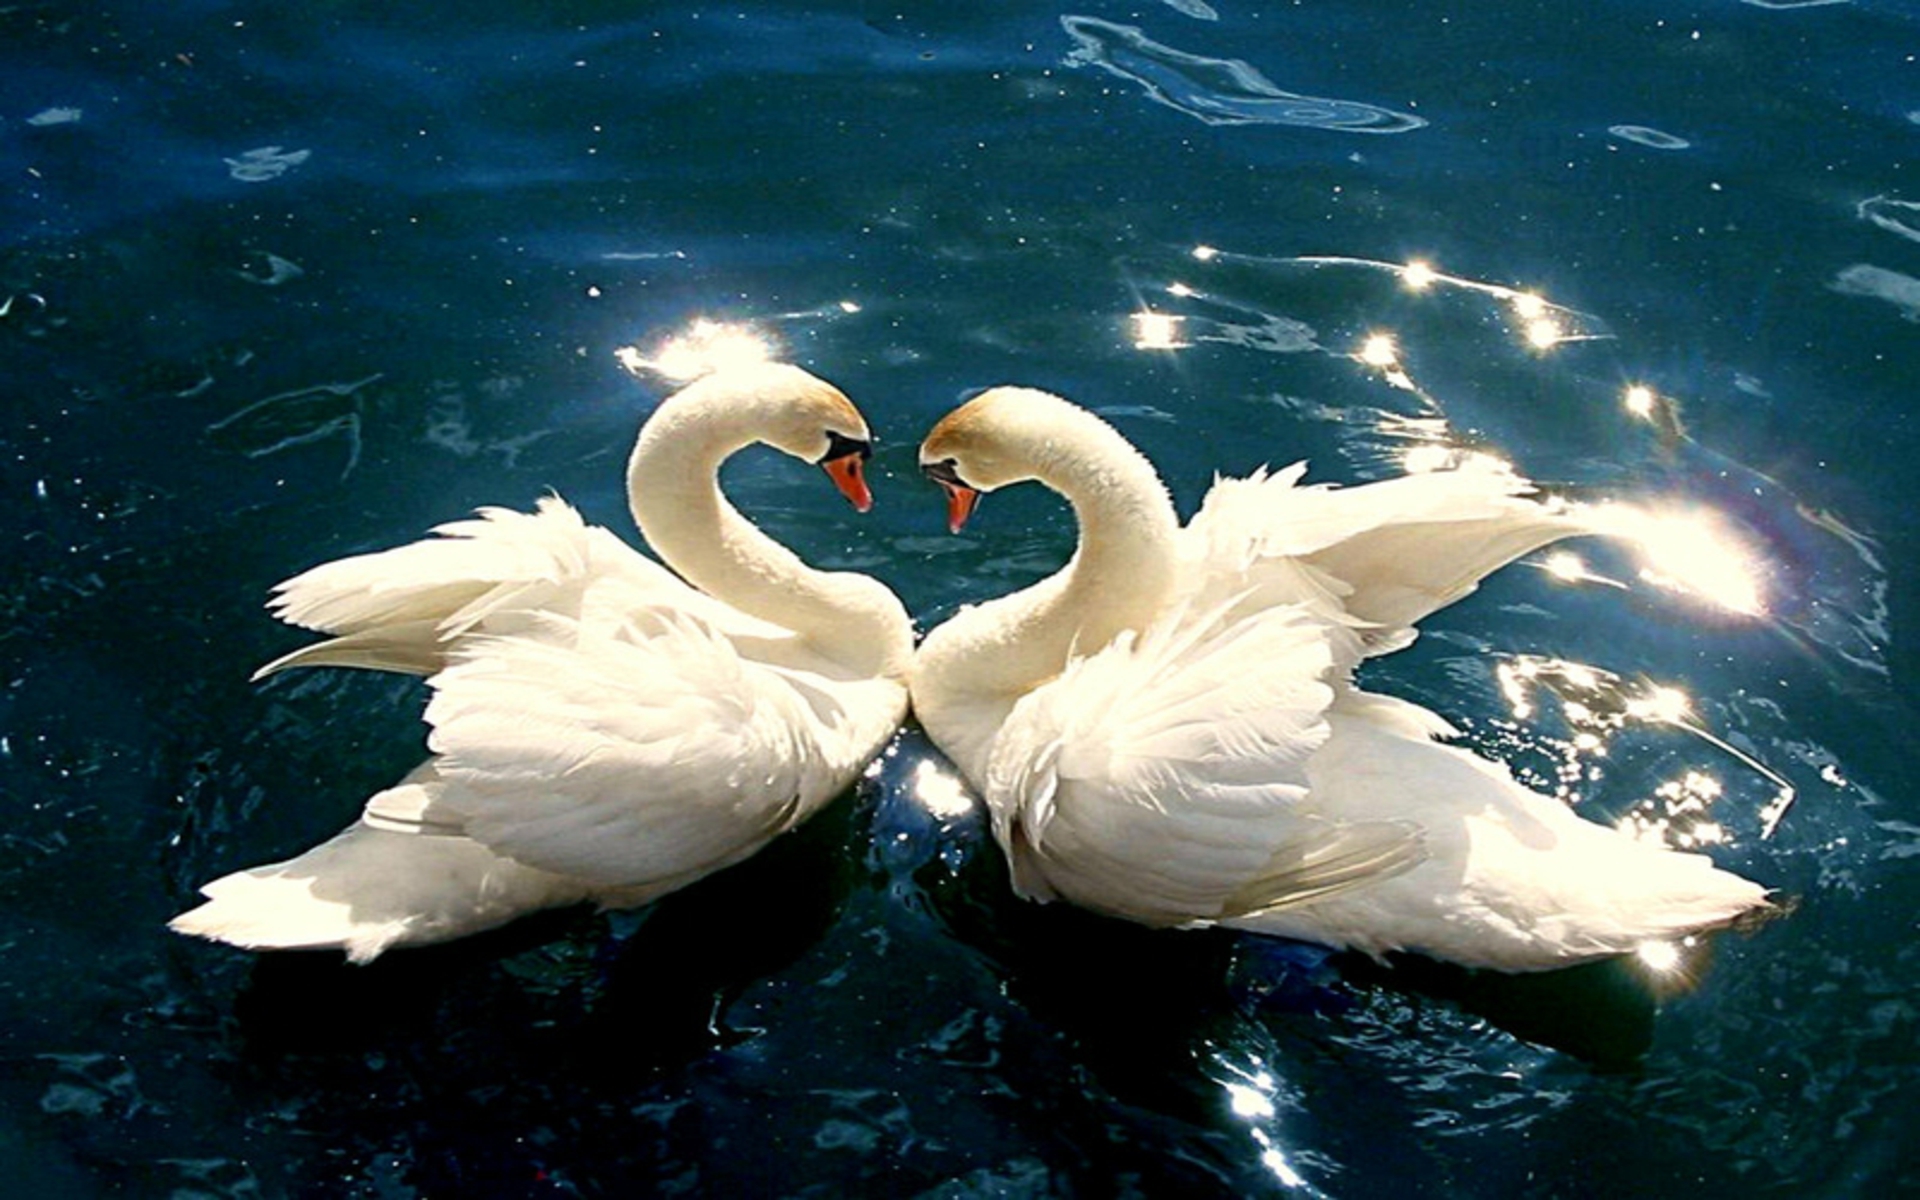 DOWNLOAD: Swans pictures.jpg free picture 2560 x 1600